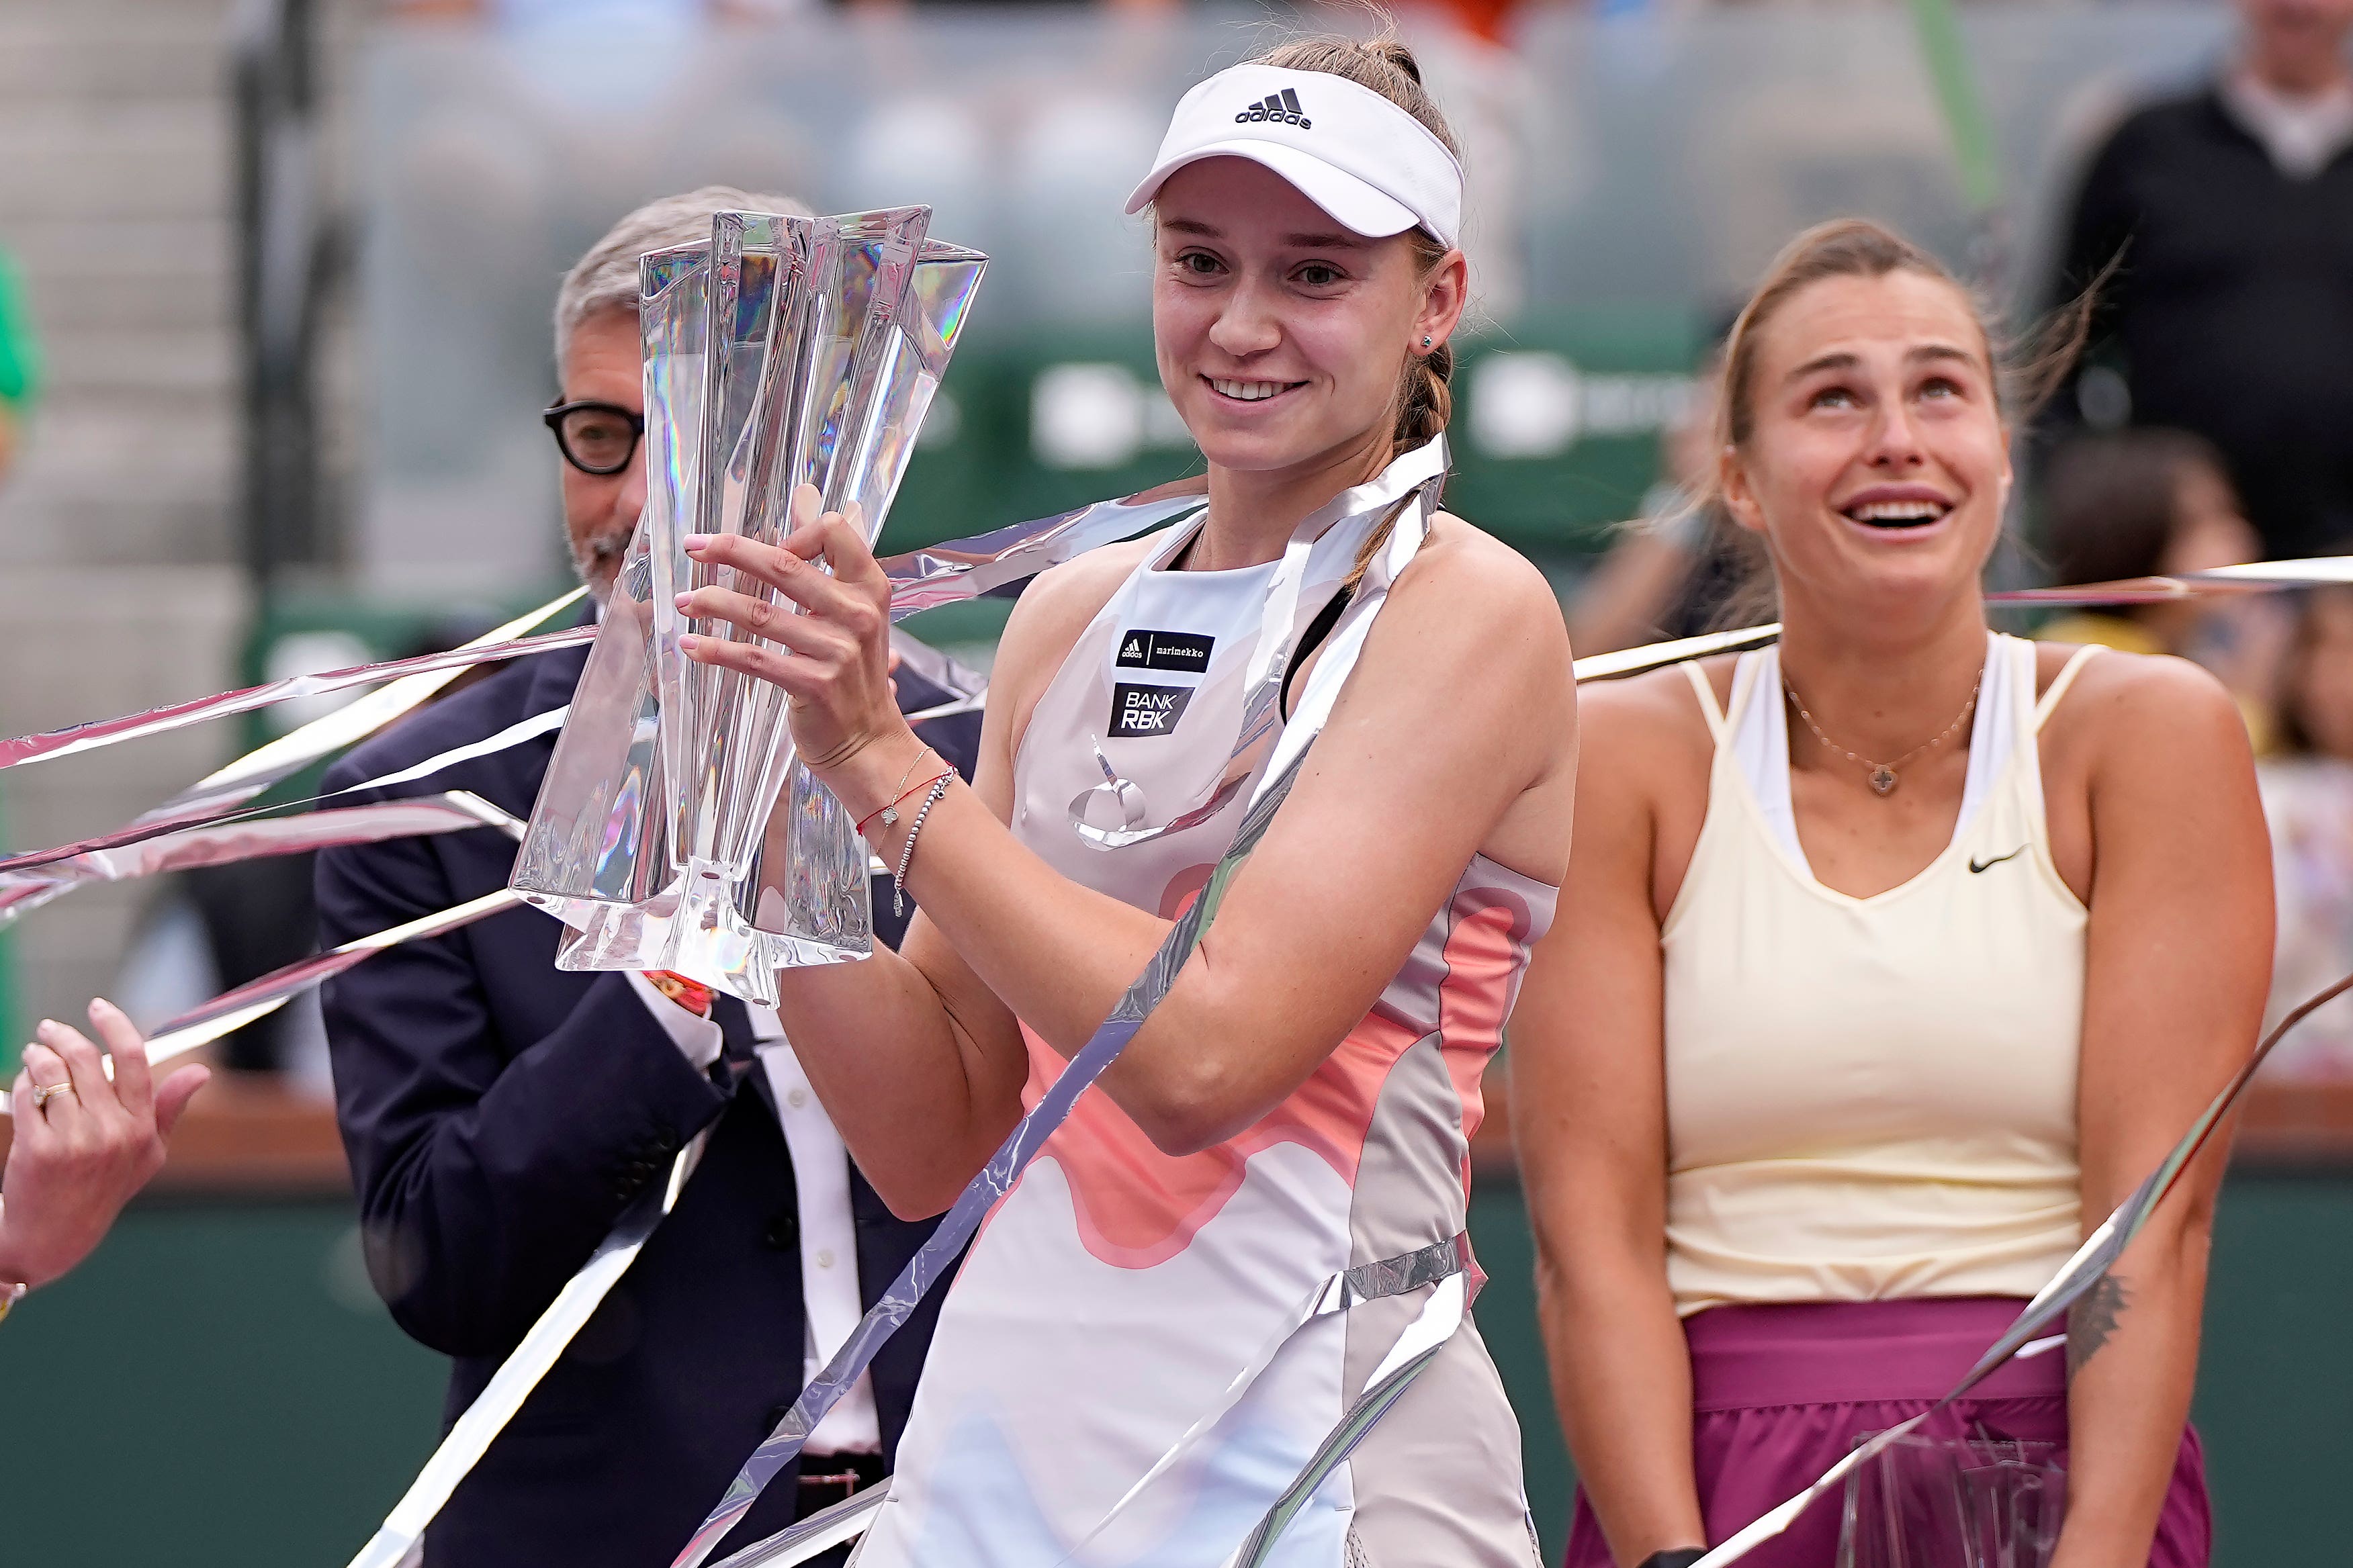 Elena Rybakina wins in Indian Wells for first title since Wimbledon